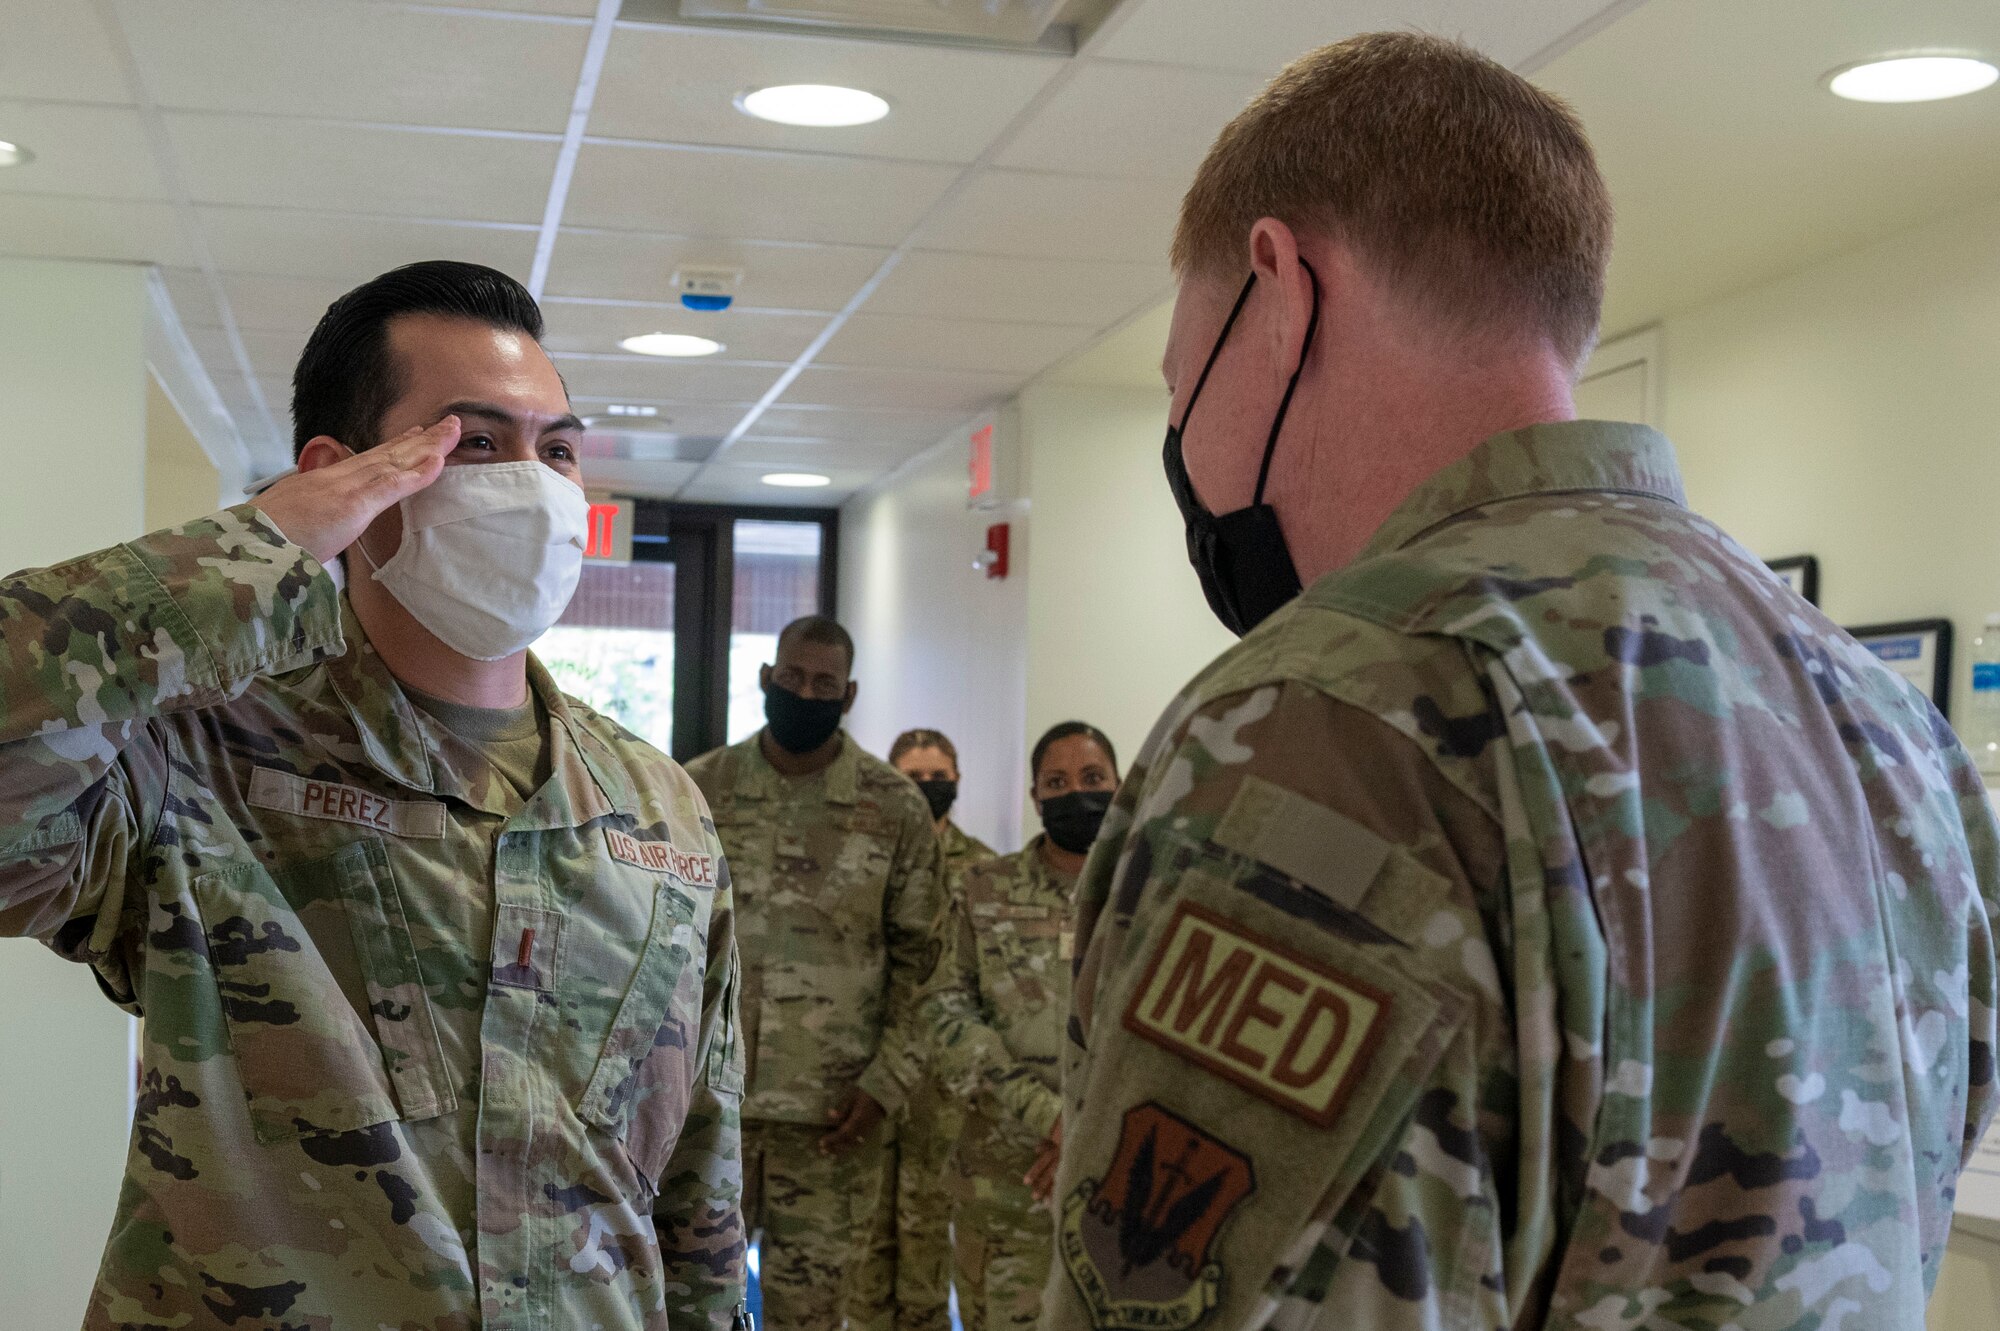 2nd Lt. Adrian Perez, 4th Medical Group medical readiness flight commander (left), salutes Brig. Gen. (Dr.) Robert Bogart, Air Combat Command command surgeon during a tour at Seymour Johnson Air Force Base, North Carolina, April 6, 2022. Bogart toured the 4th MDG and the Kiecker Dental Clinic talking to Airmen about their day-to-day occupations. (U.S. Air Force photo by Senior Airman Kevin Holloway)